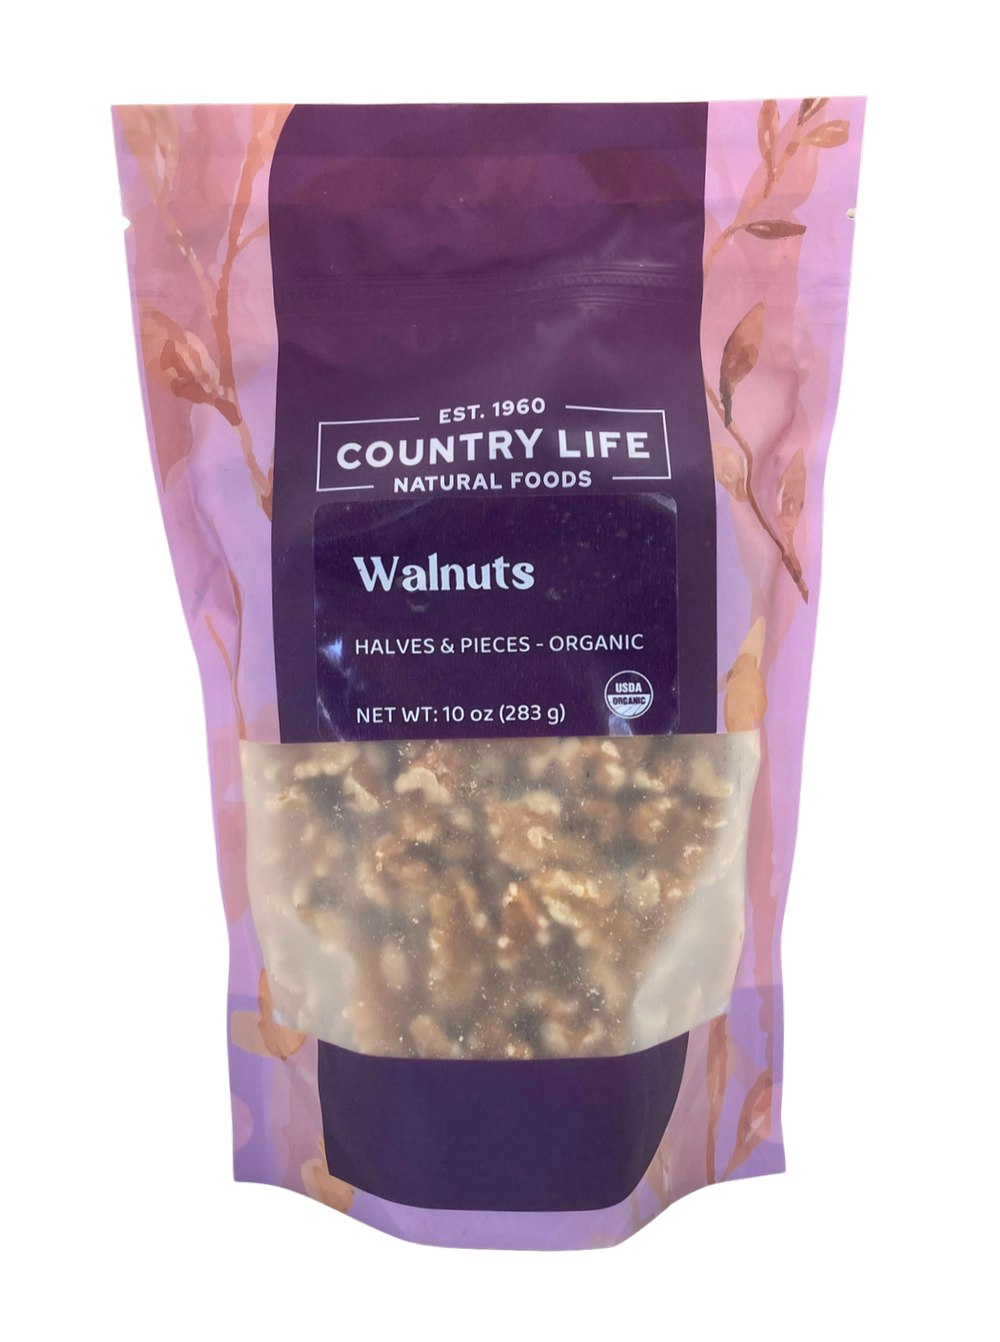 Organic Walnuts, 1/2s & Pieces - Country Life Natural Foods